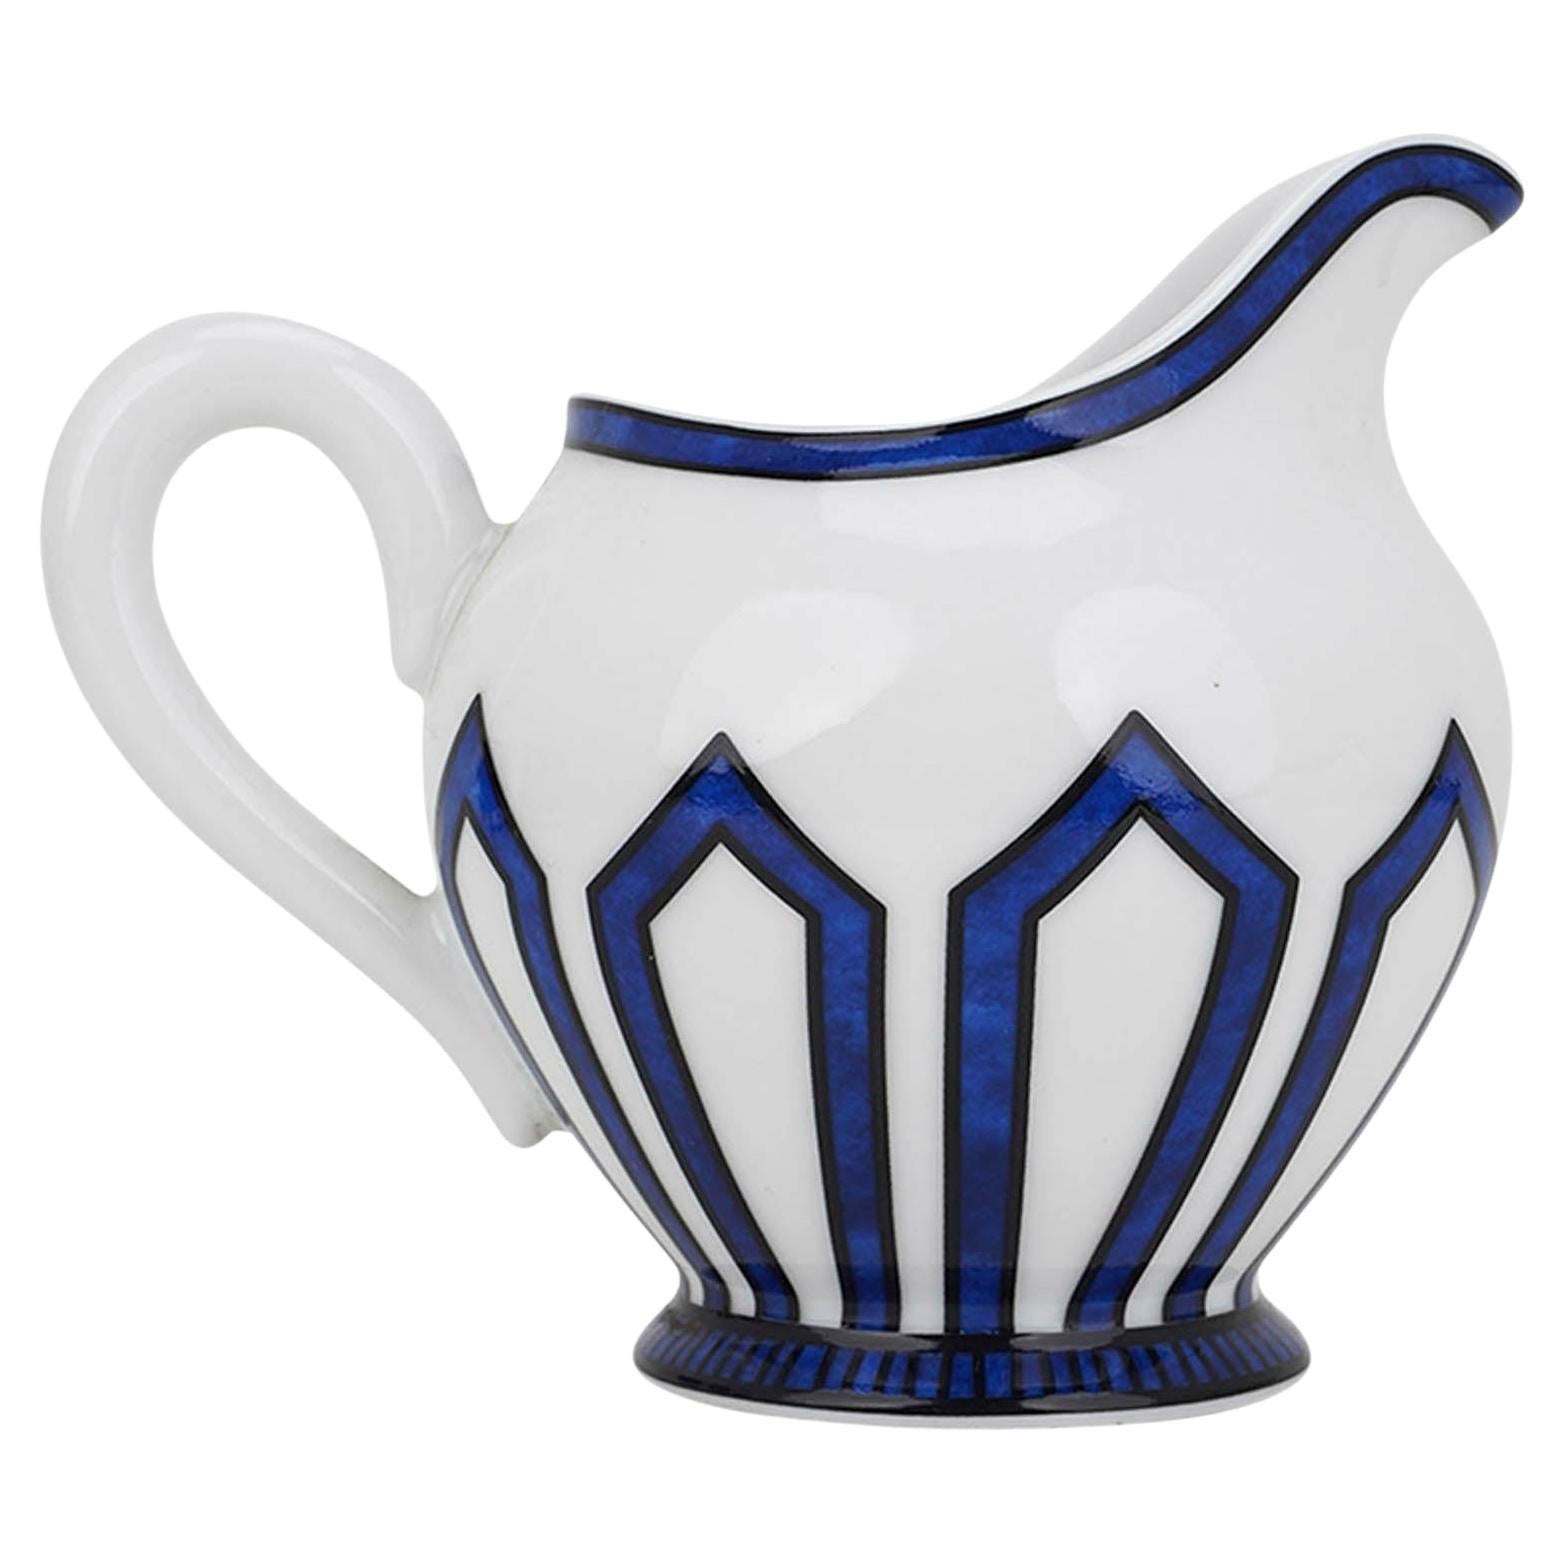 Mightychic offers an Hermes Bleus D'Ailleurs Creamer.
Treat yourself to a quiet moment to experience 